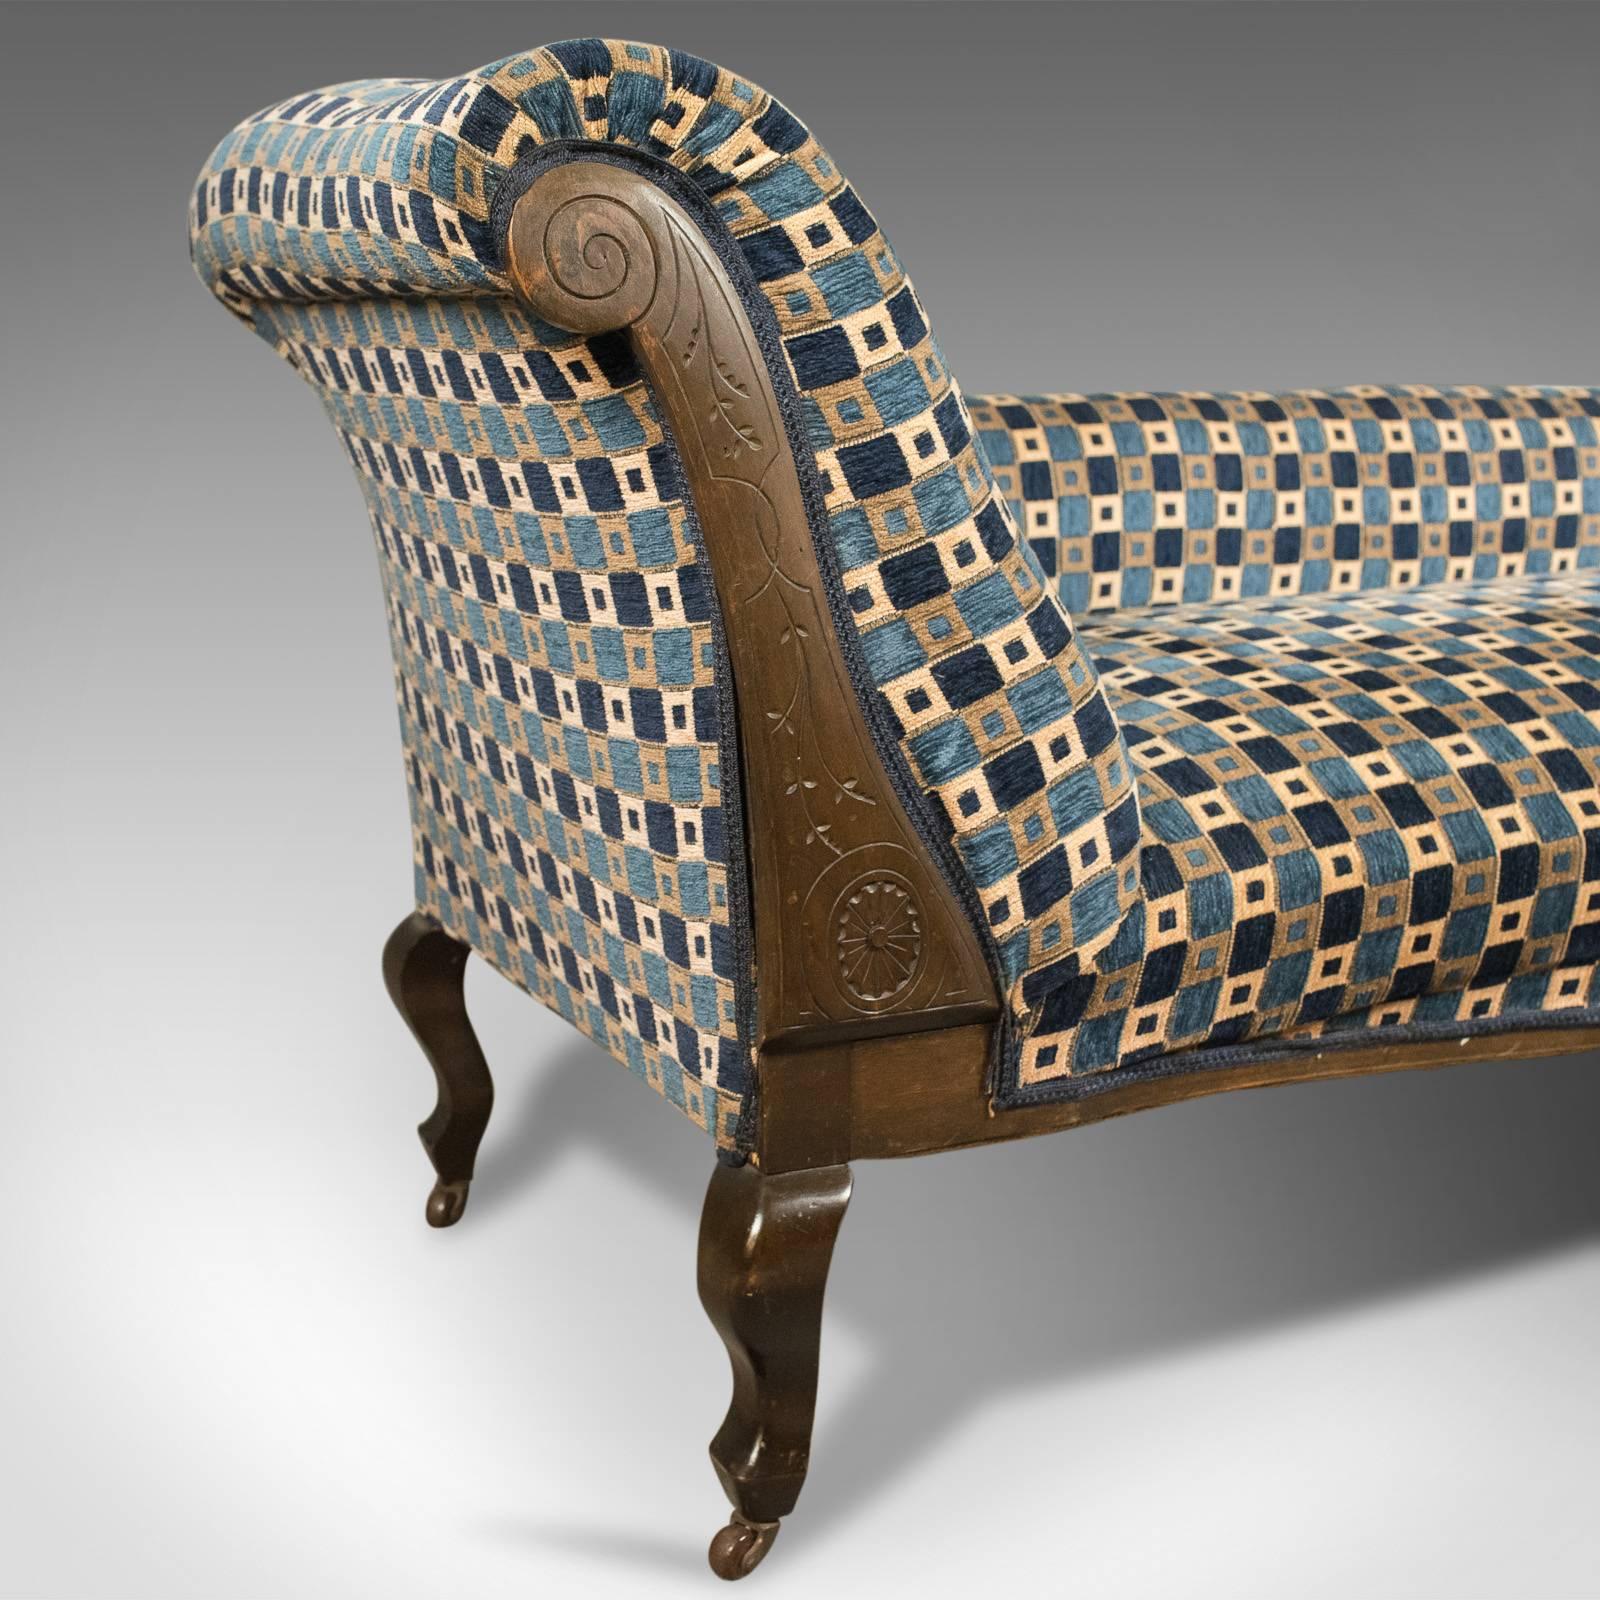 Upholstery Antique Chaise Longue, Edwardian Daybed, English, circa 1910